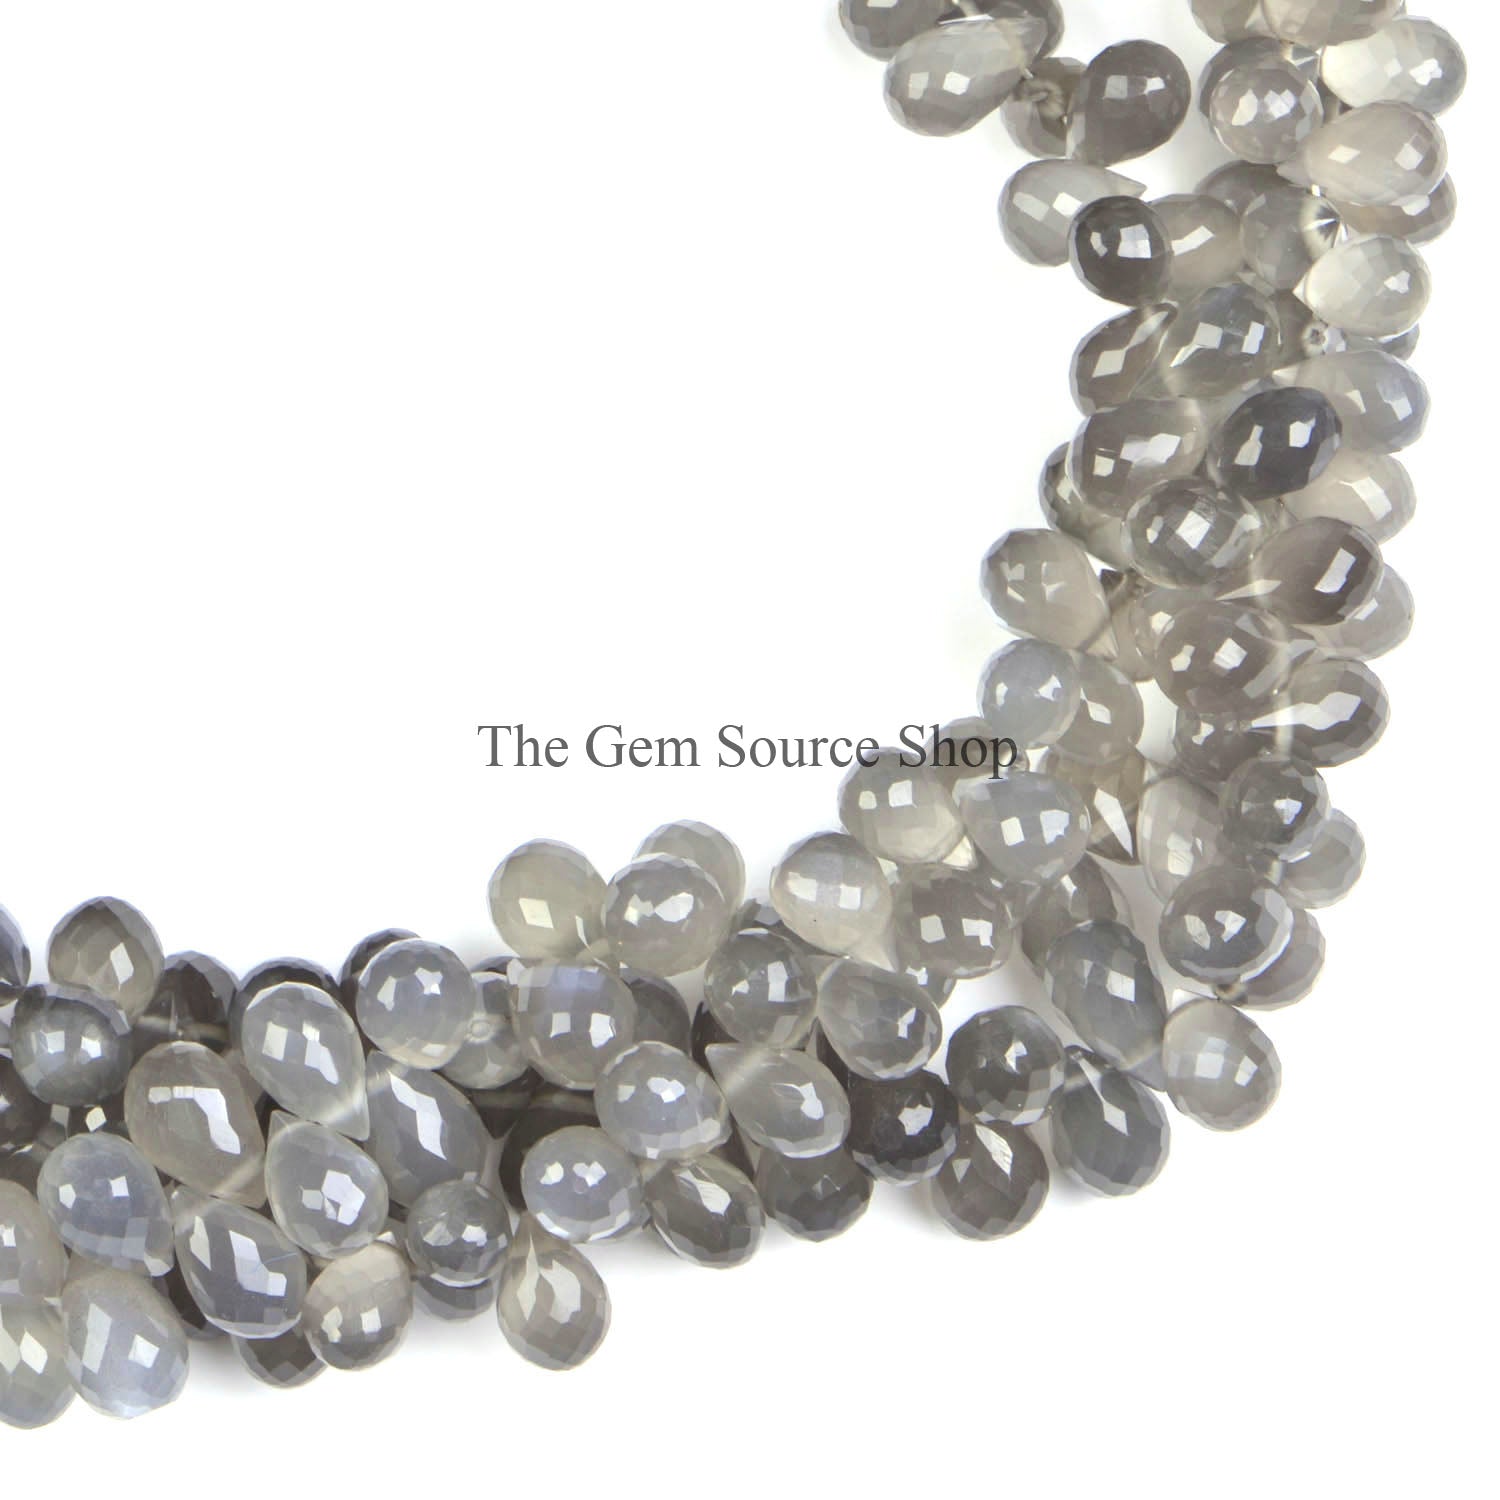 Grey Moonstone Beads, Moonstone Faceted Beads, Moonstone Drop Shape Beads, Side Drill Drop Beads